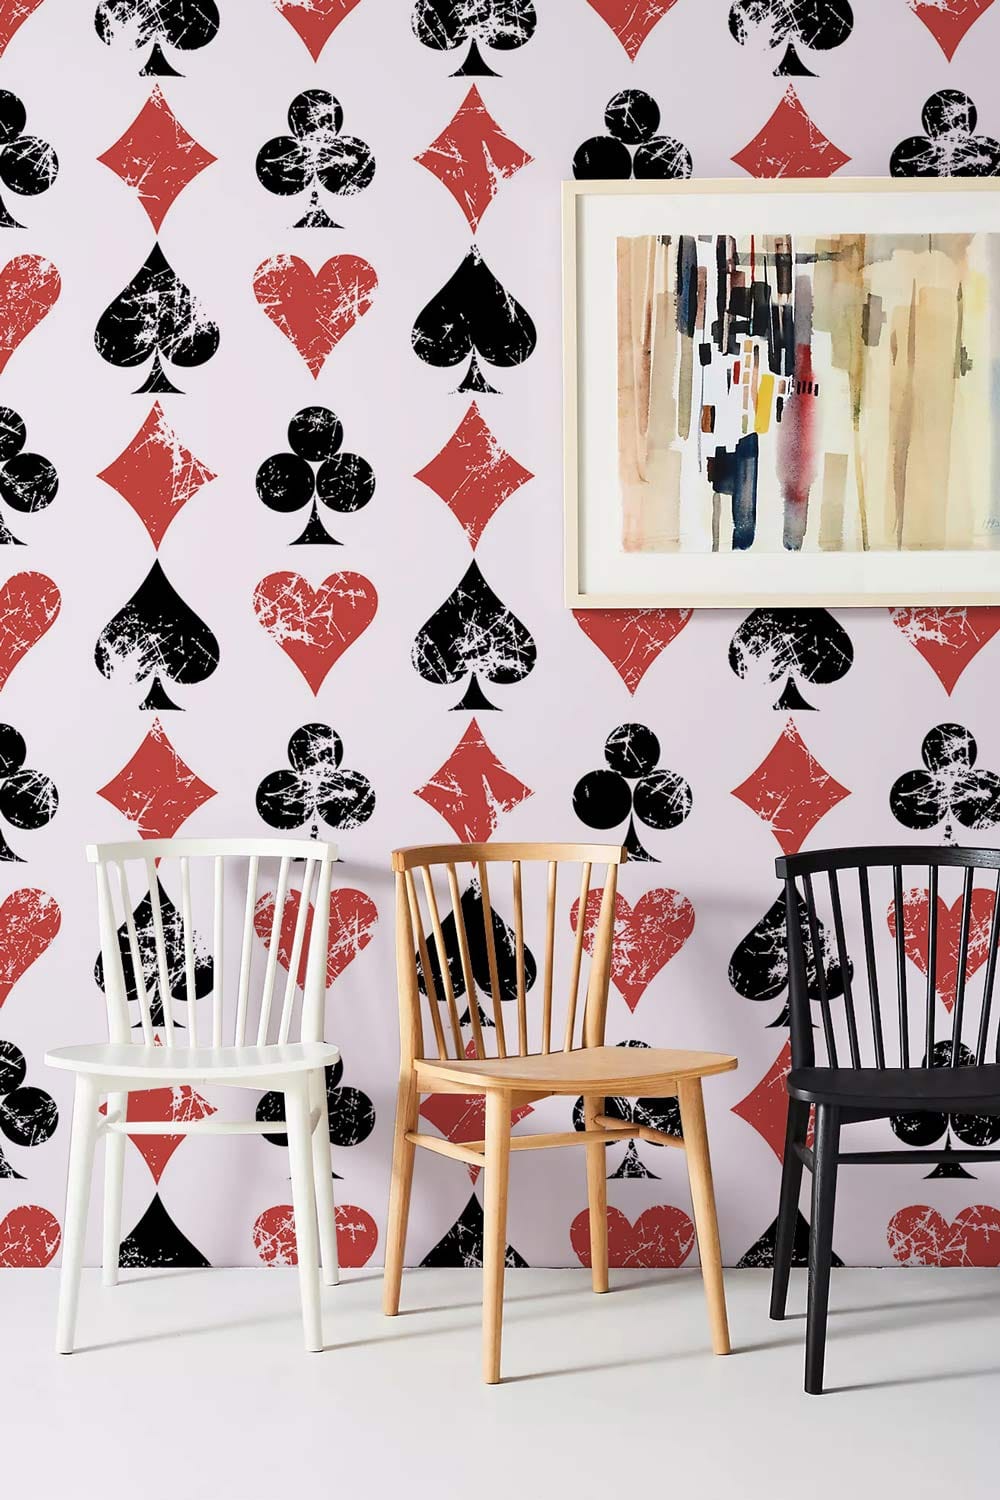 wallpaper mural decorating with paintings and chairs as a backdrop